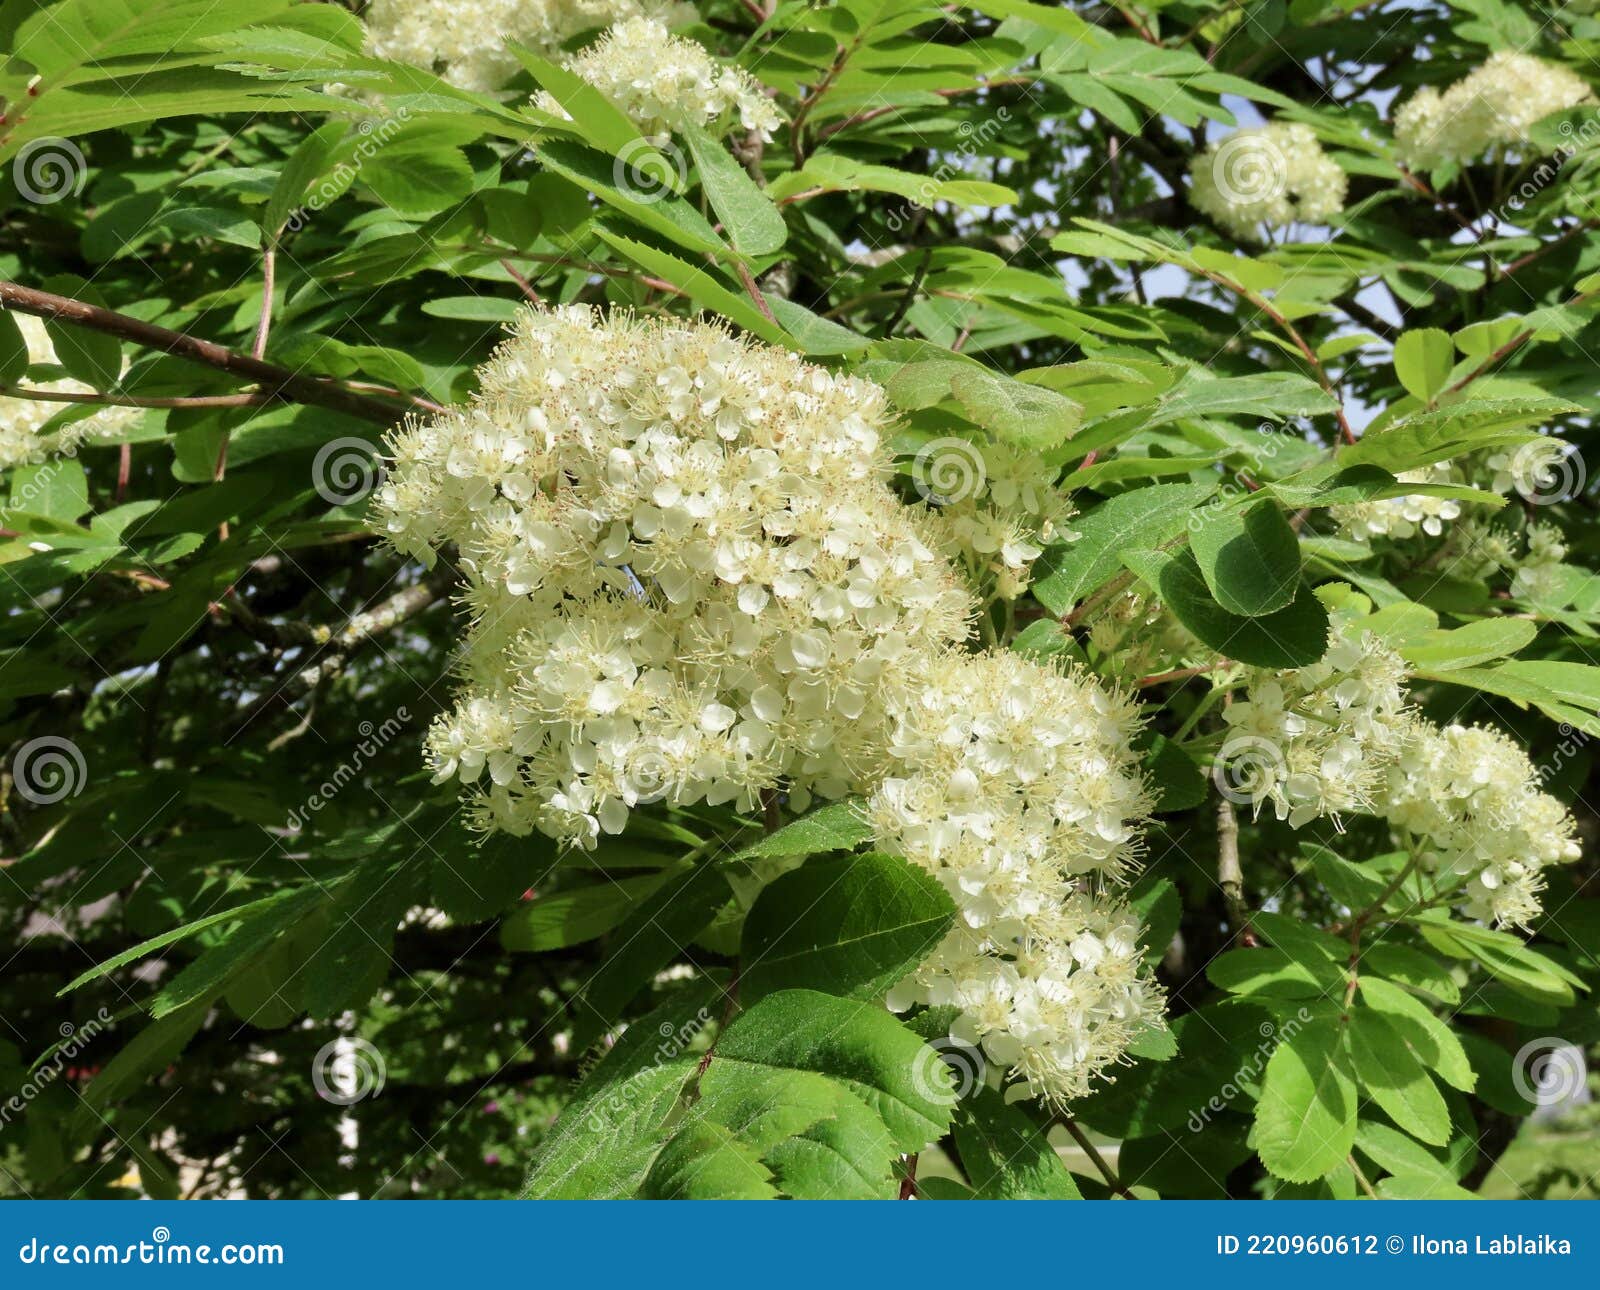 Rowan branch with flowers stock photo. Image of ornamental - 220960612